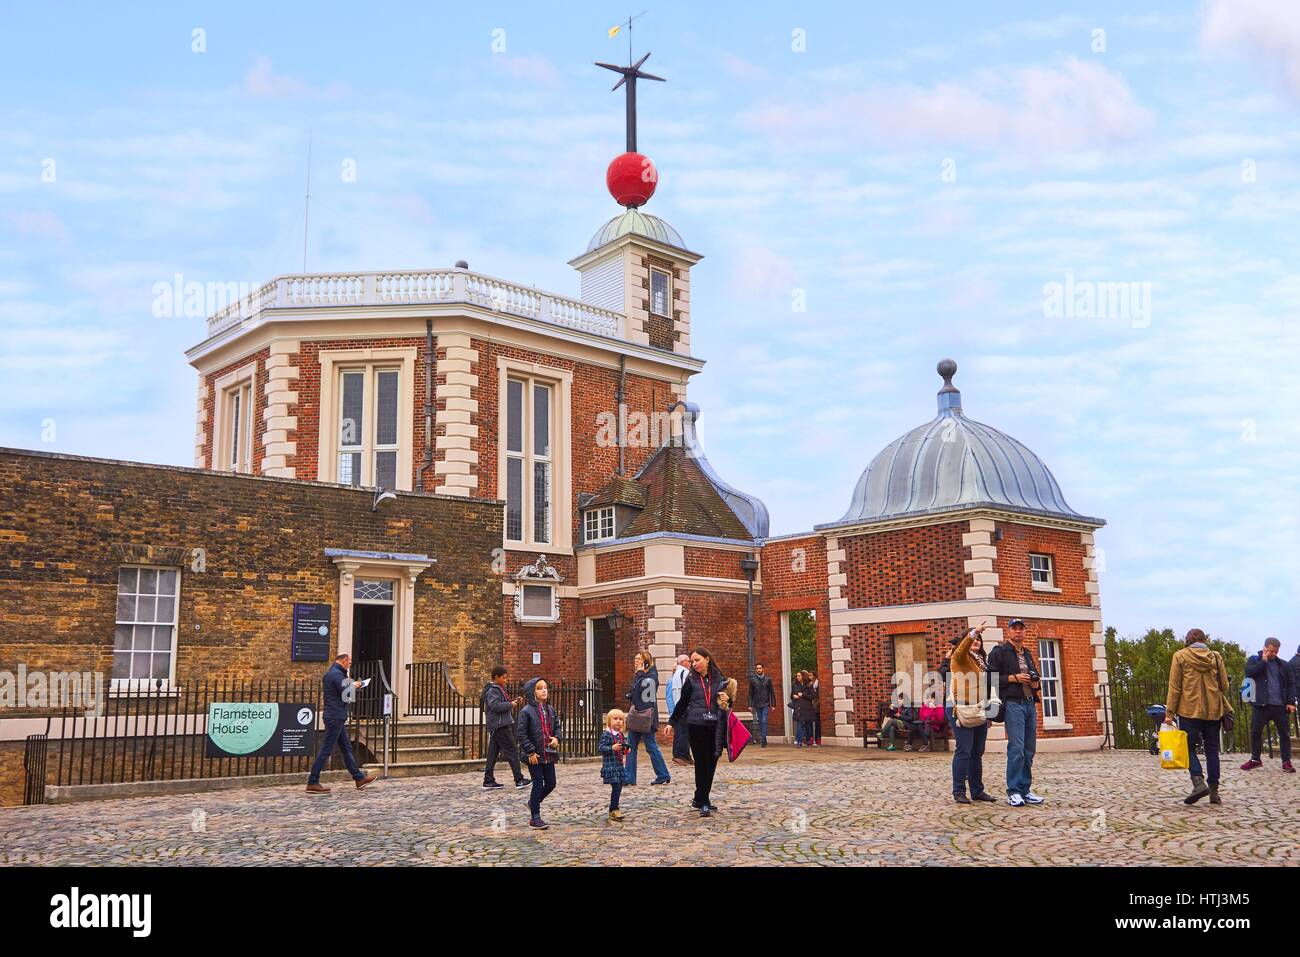 Greenwich, London, UK - October 30 2016: Unidentified visitors at Flamsteed House with the famous red Time Ball at Greenwich Observatory Stock Photo